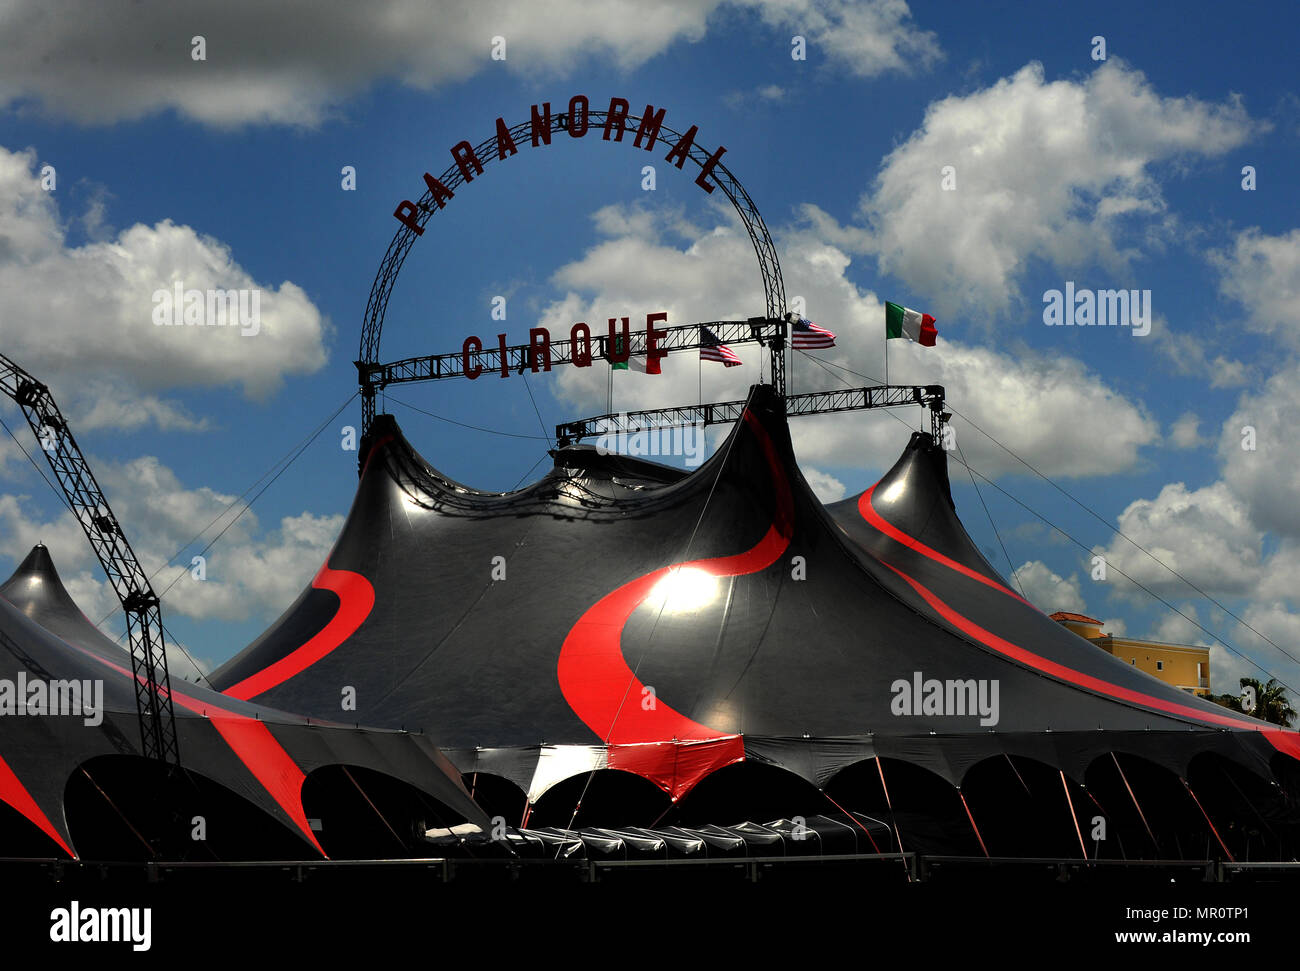 Palmetto, Florida, USA. 23rd May, 2018. The Paranormal Cirque circus tent is seen during a media preview on May 23, 2018 in Palmetto, Florida. The new Paranormal Cirque, created by Manuel Rebecca, the president and owner of Cirque Italia, is in rehearsals for its first ever performance in Palmetto, Florida on June 7, 2018. The circus combines horror, stunts, illusions, theater, and cabaret, and is designed for an adult audience. (Paul Hennessy/Alamy) Credit: Paul Hennessy/Alamy Live News Stock Photo